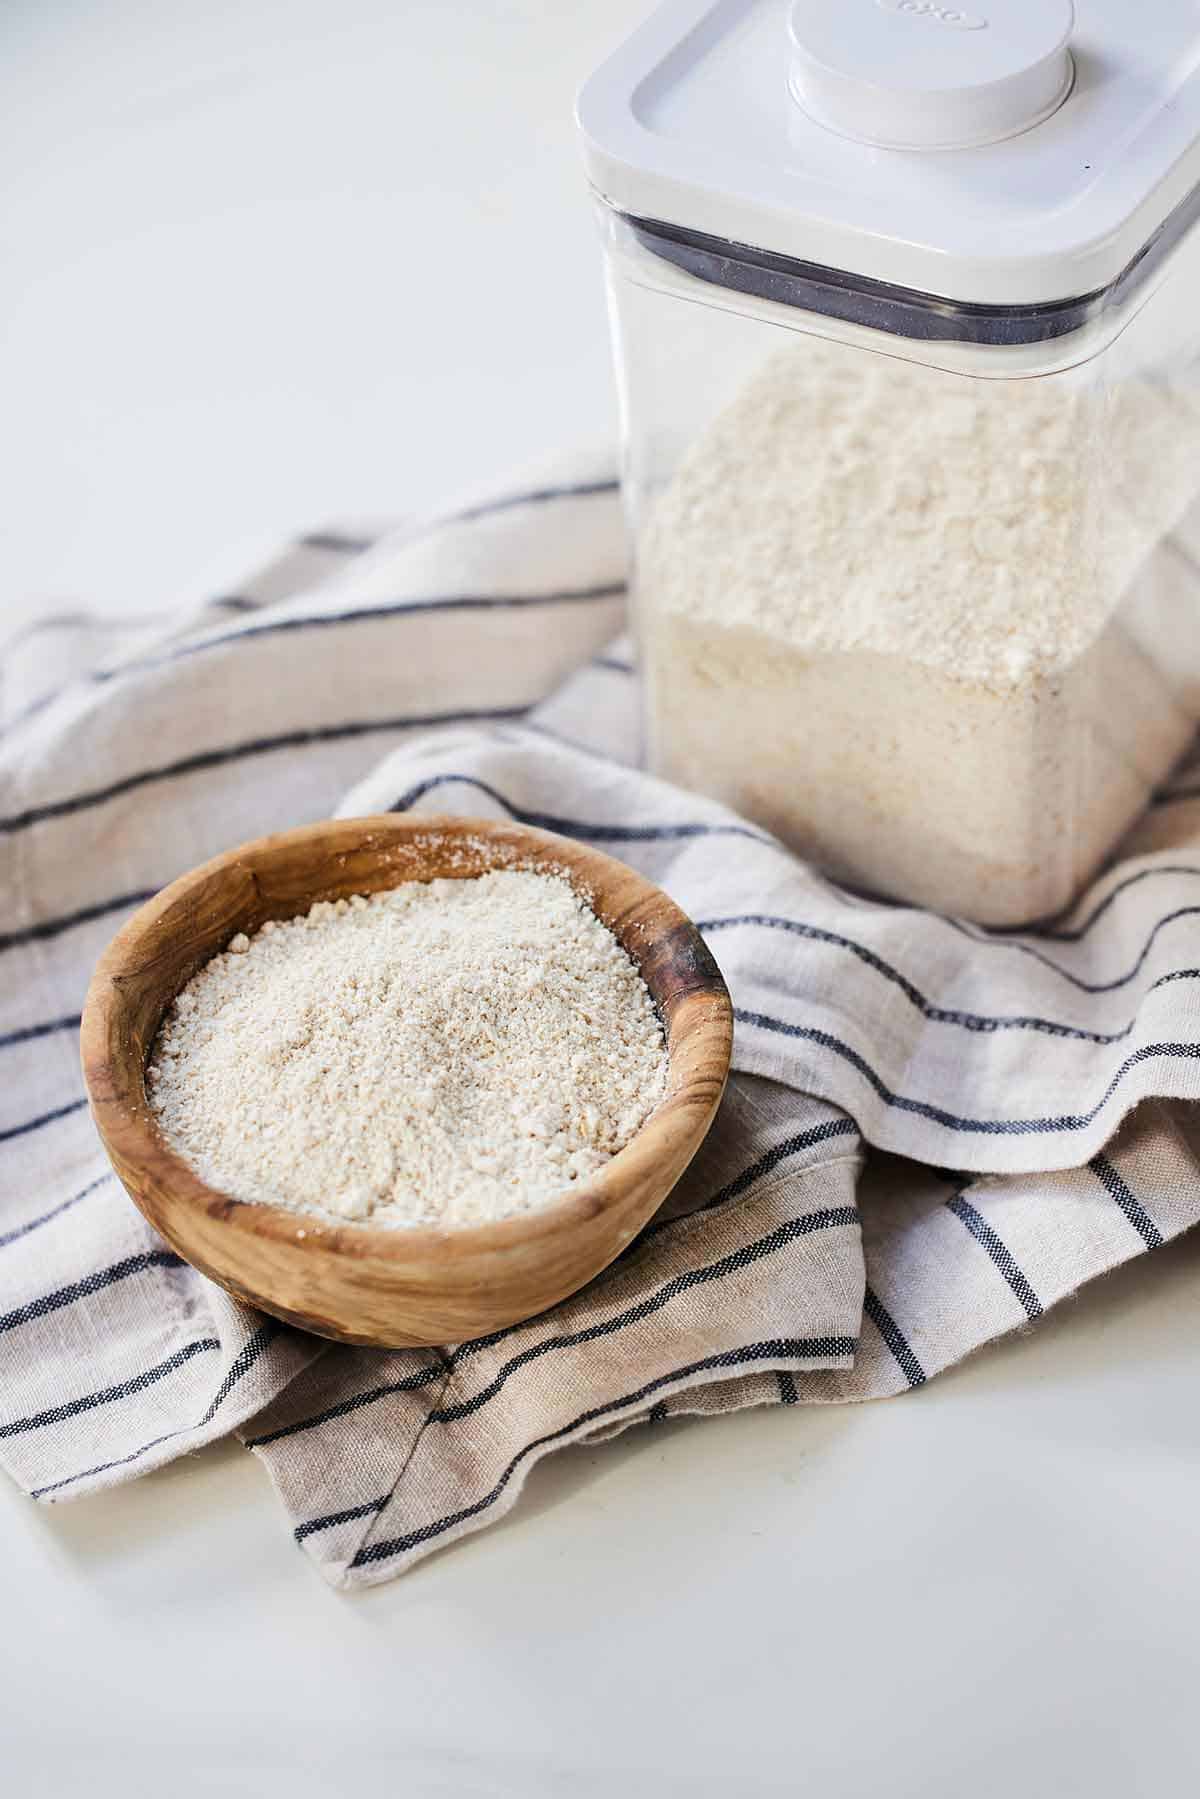 A container and bowl of oat flour on a linen napkin.